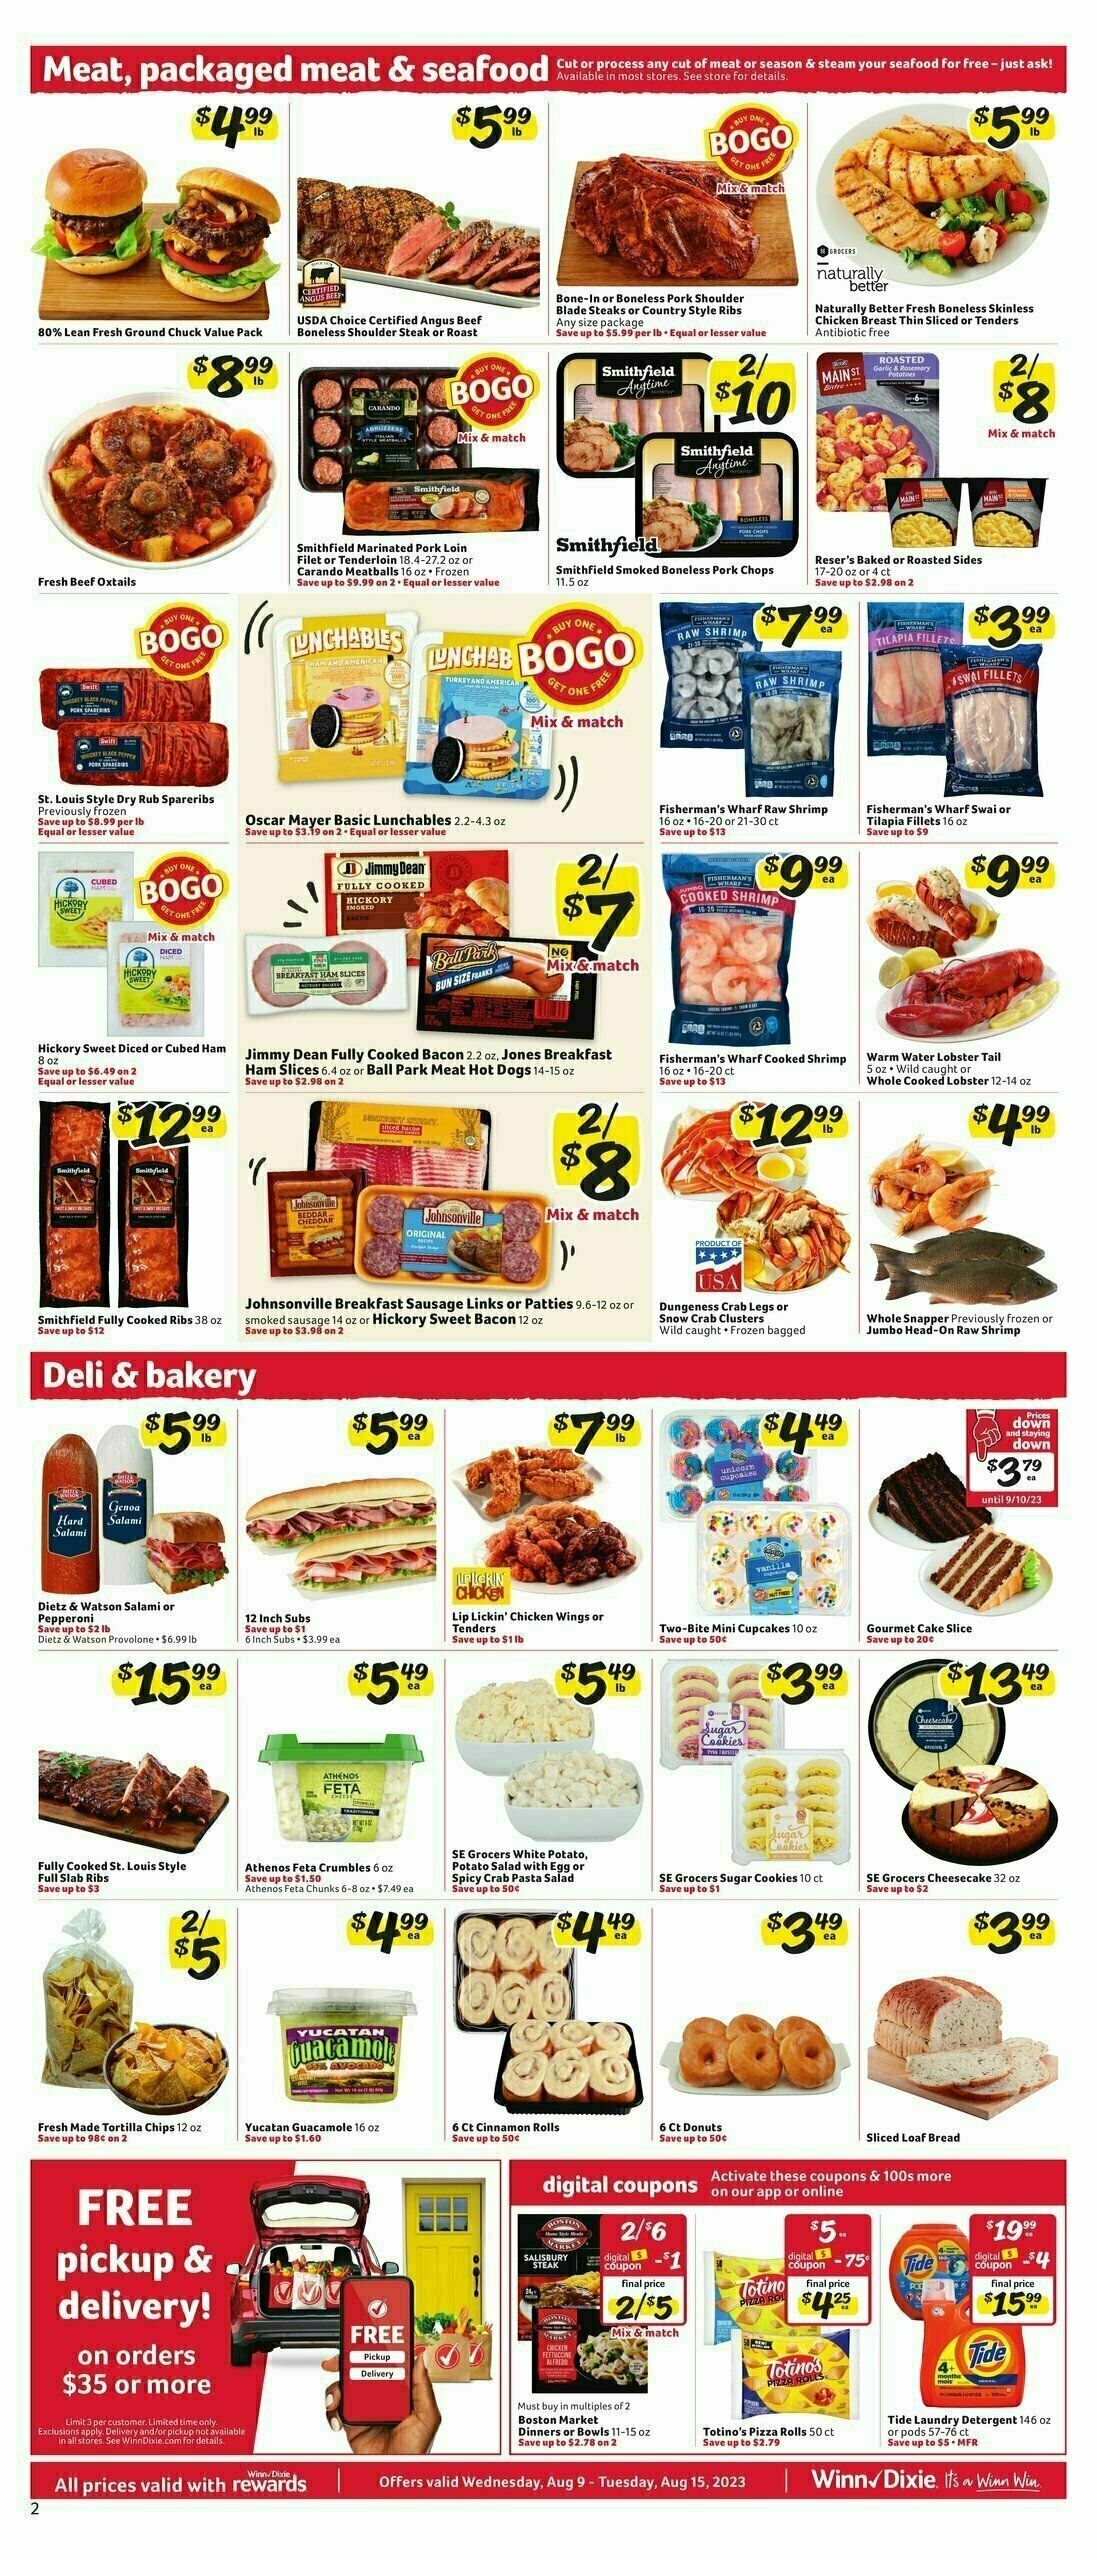 Winn-Dixie Weekly Ad from August 9